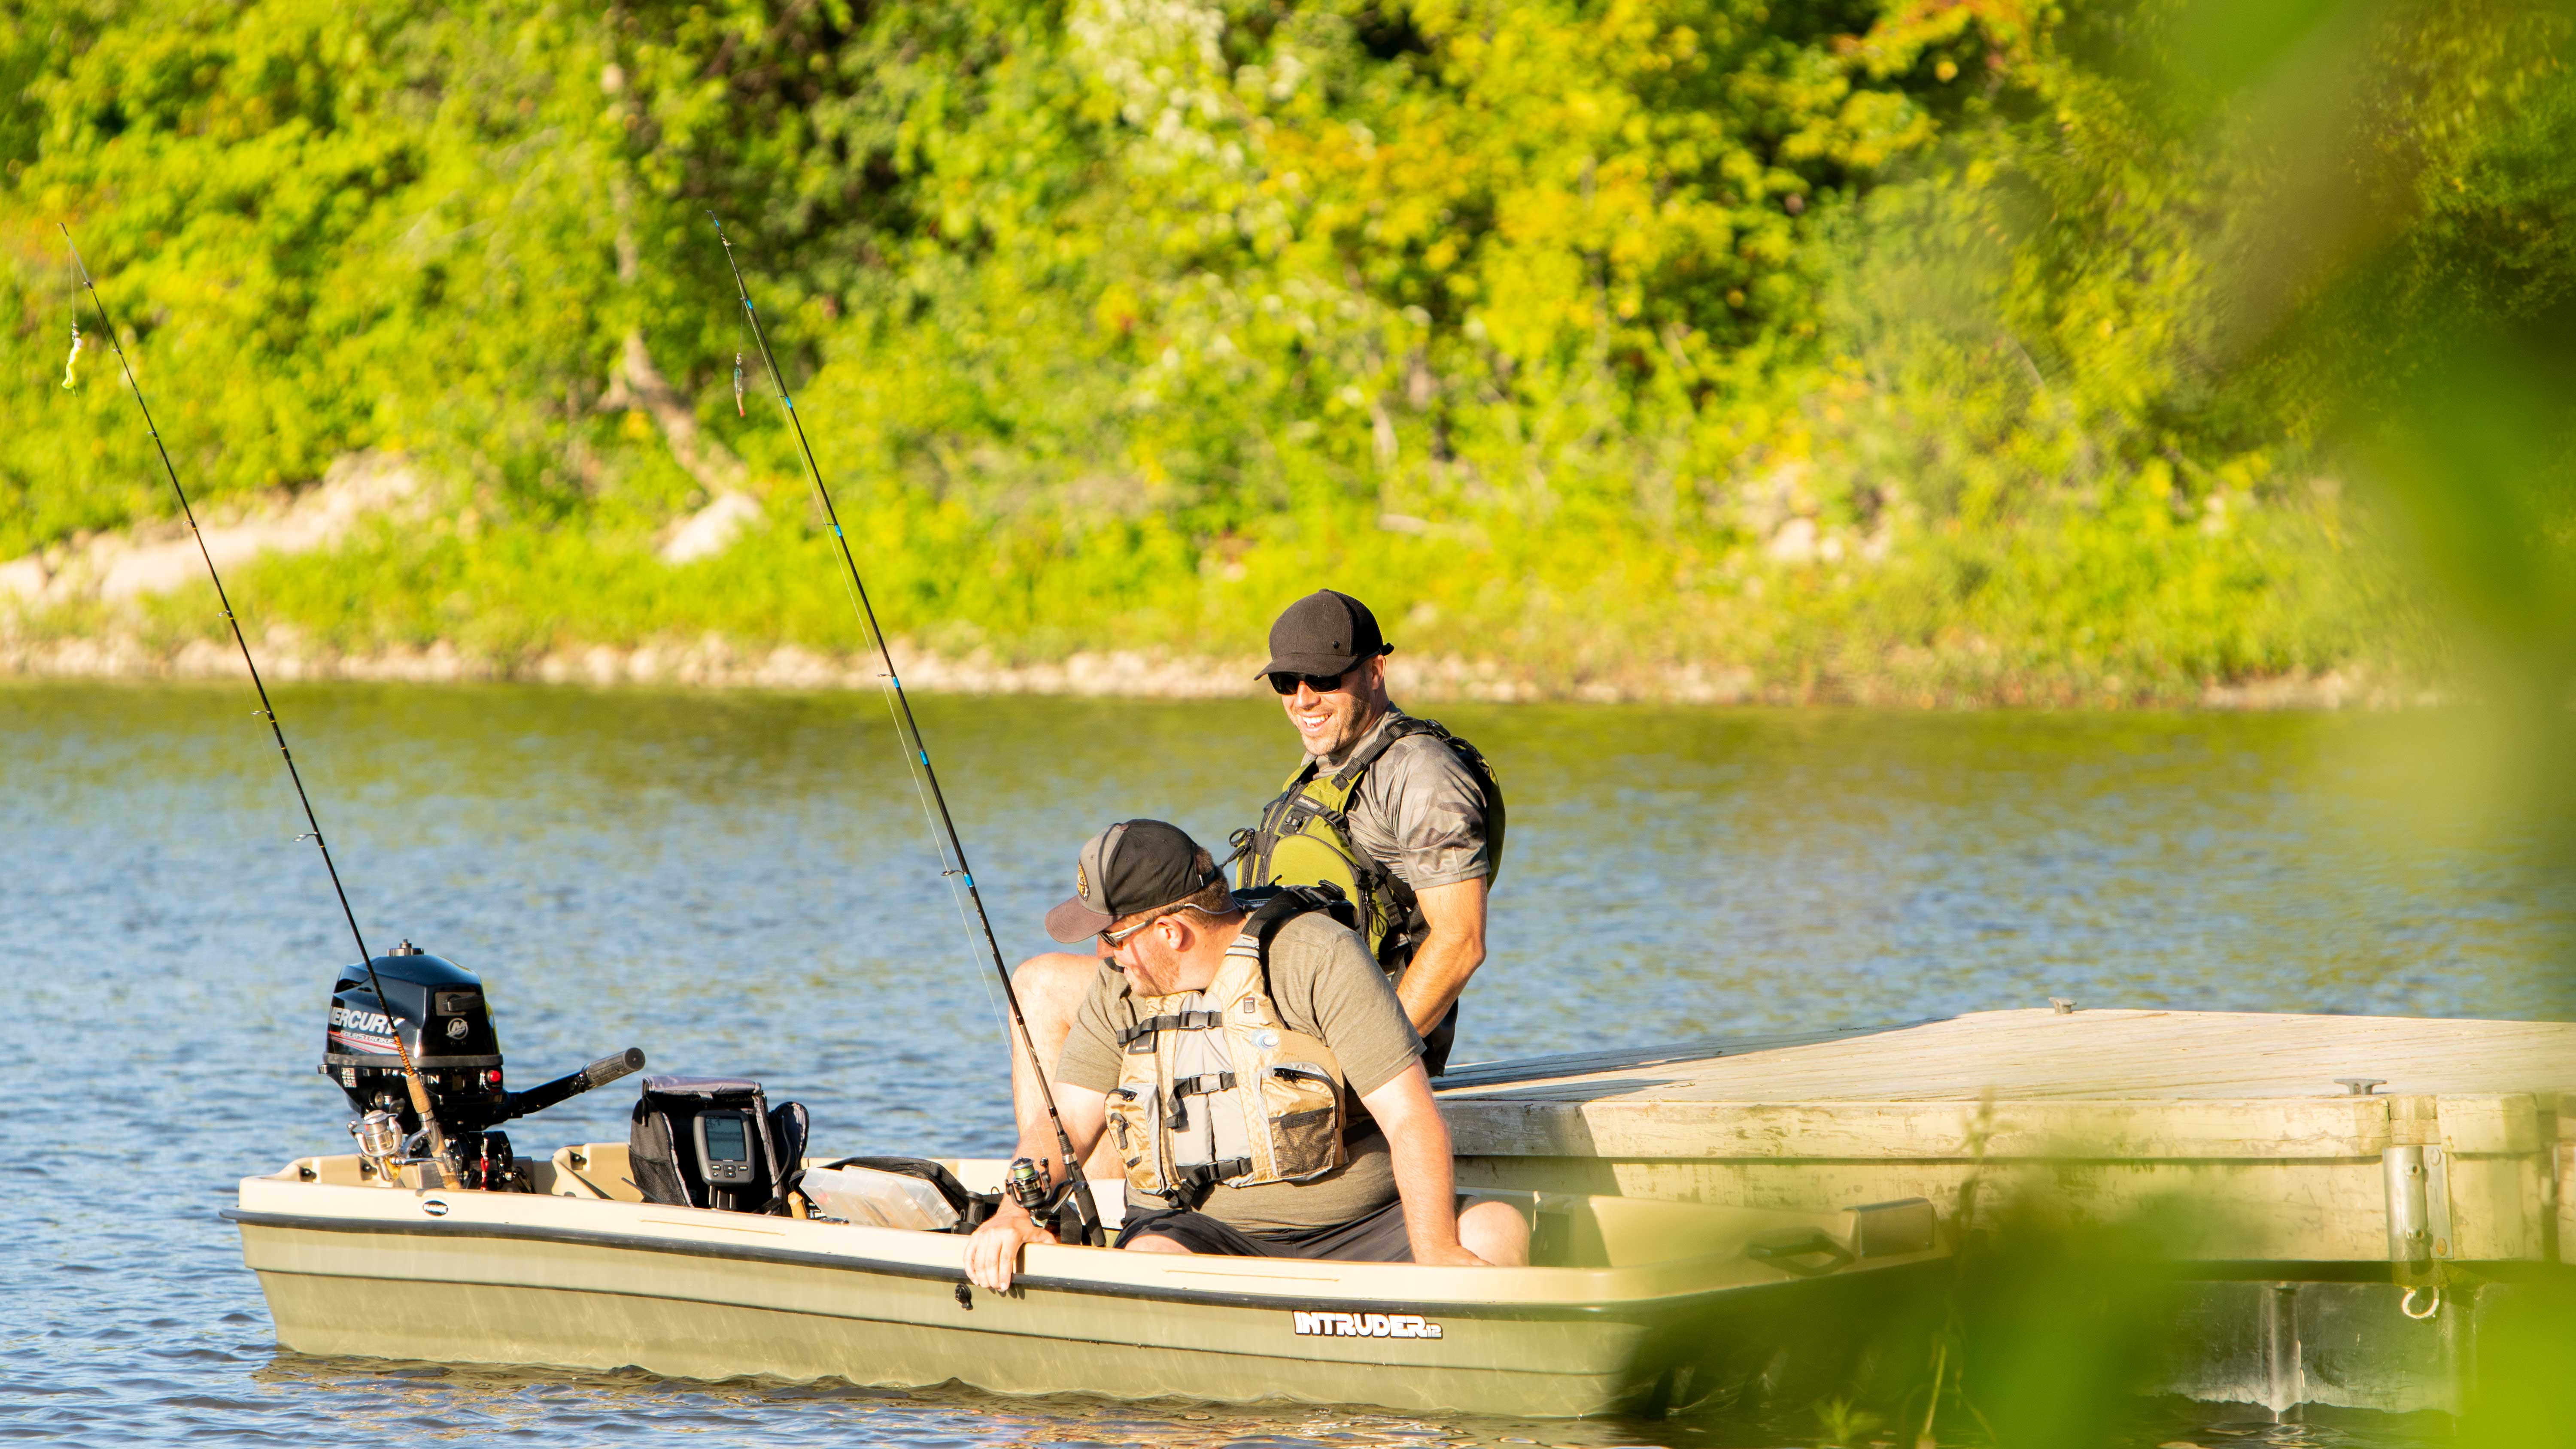 Pelican Boat Intruder 12 - Jon Fishing Boat - 12 ft - Great for Hunting and Fishing, Khaki/Beige - image 5 of 9